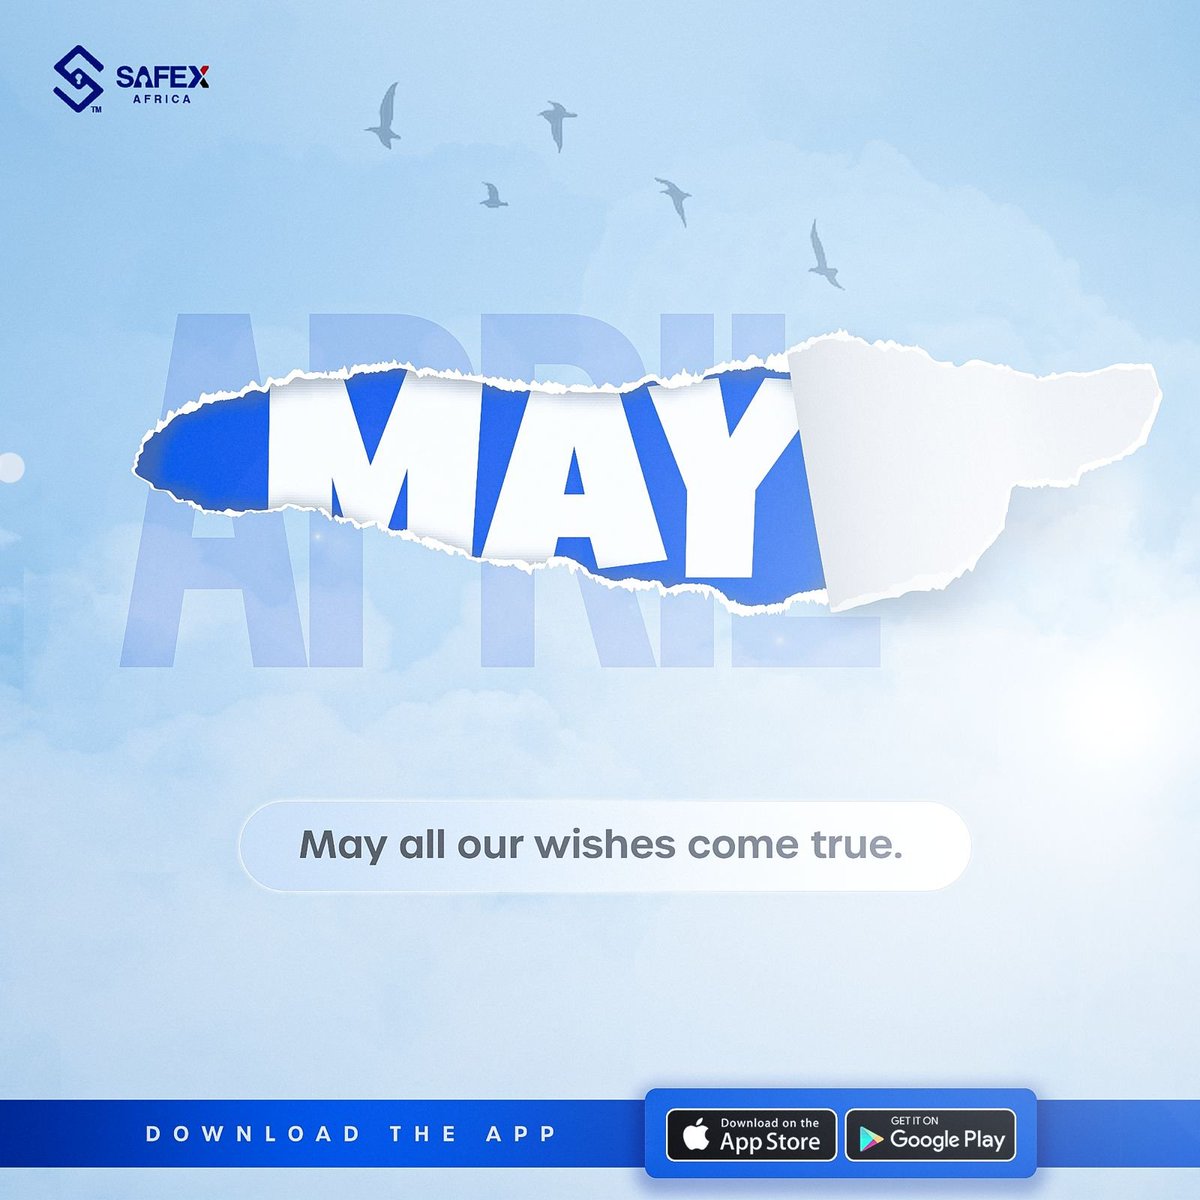 Welcome to the fifth month of the year.
Let’s keep pushing.
#May #HapyNewMonth #SafeX